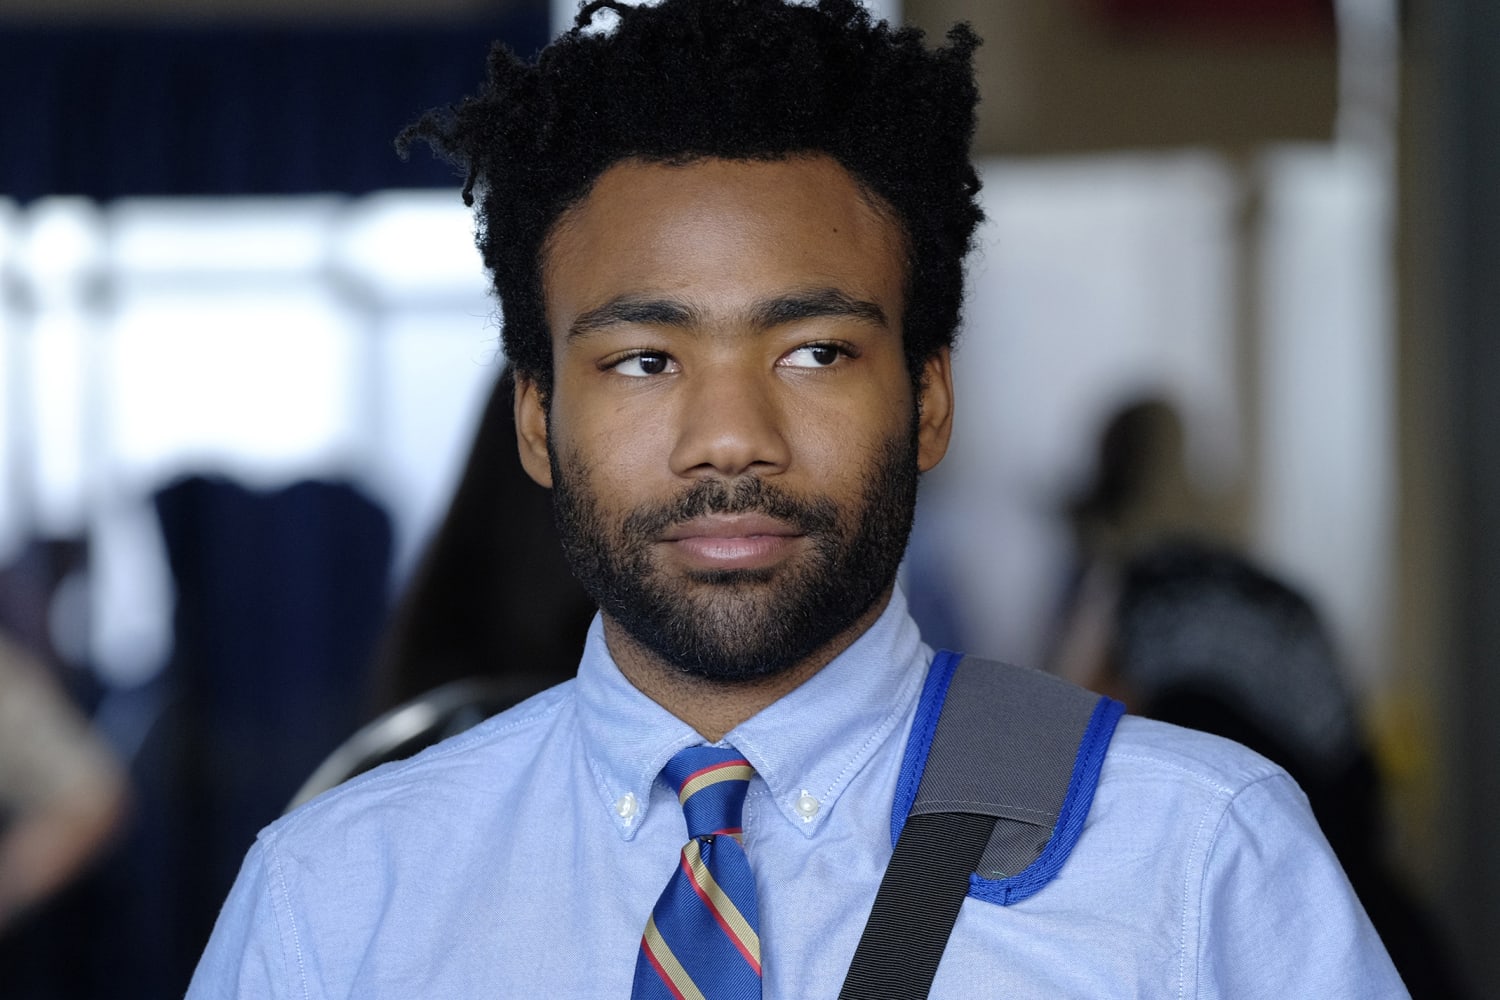 Donald Glover on why 'Atlanta' is ending after its fourth season